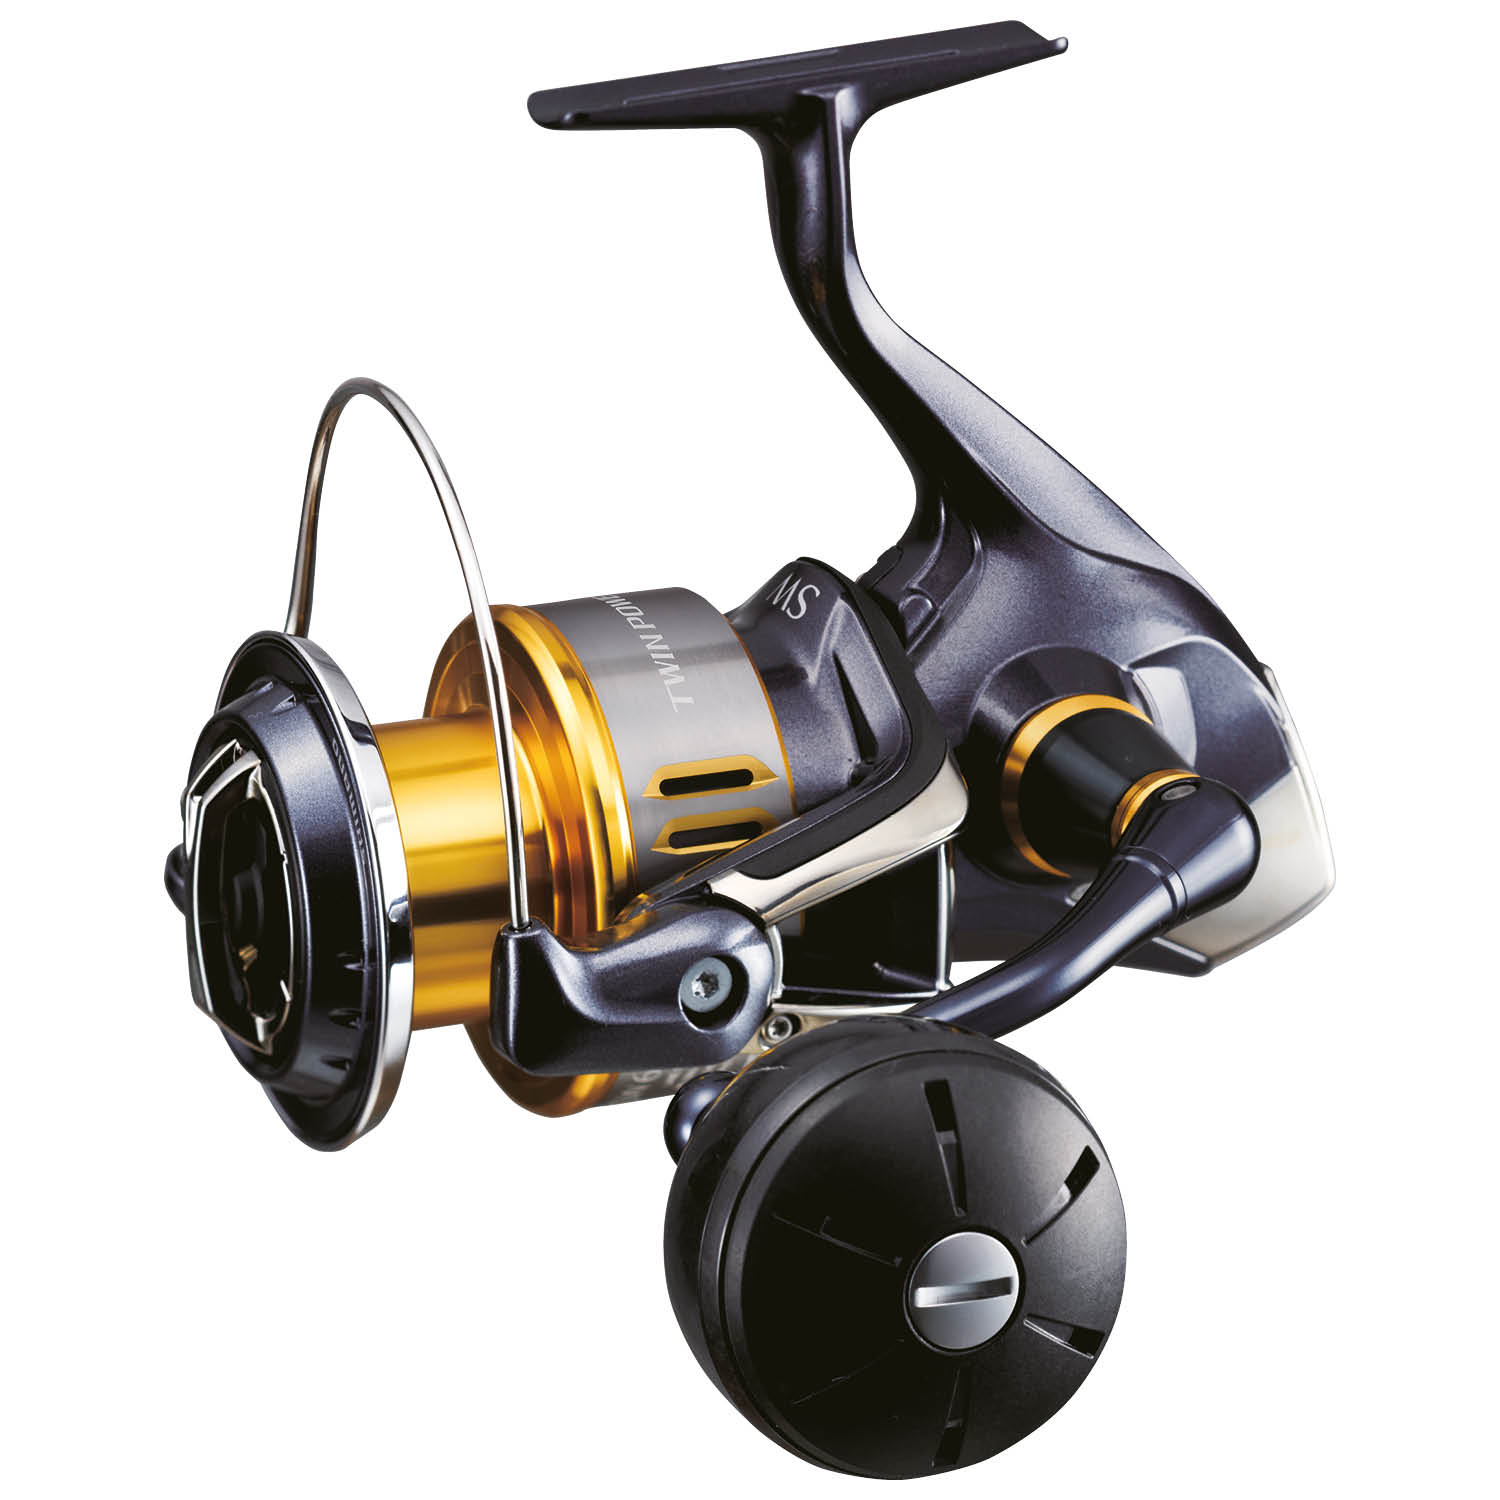 Shimano reel TwinPower SW 8000HG Mint near One time use